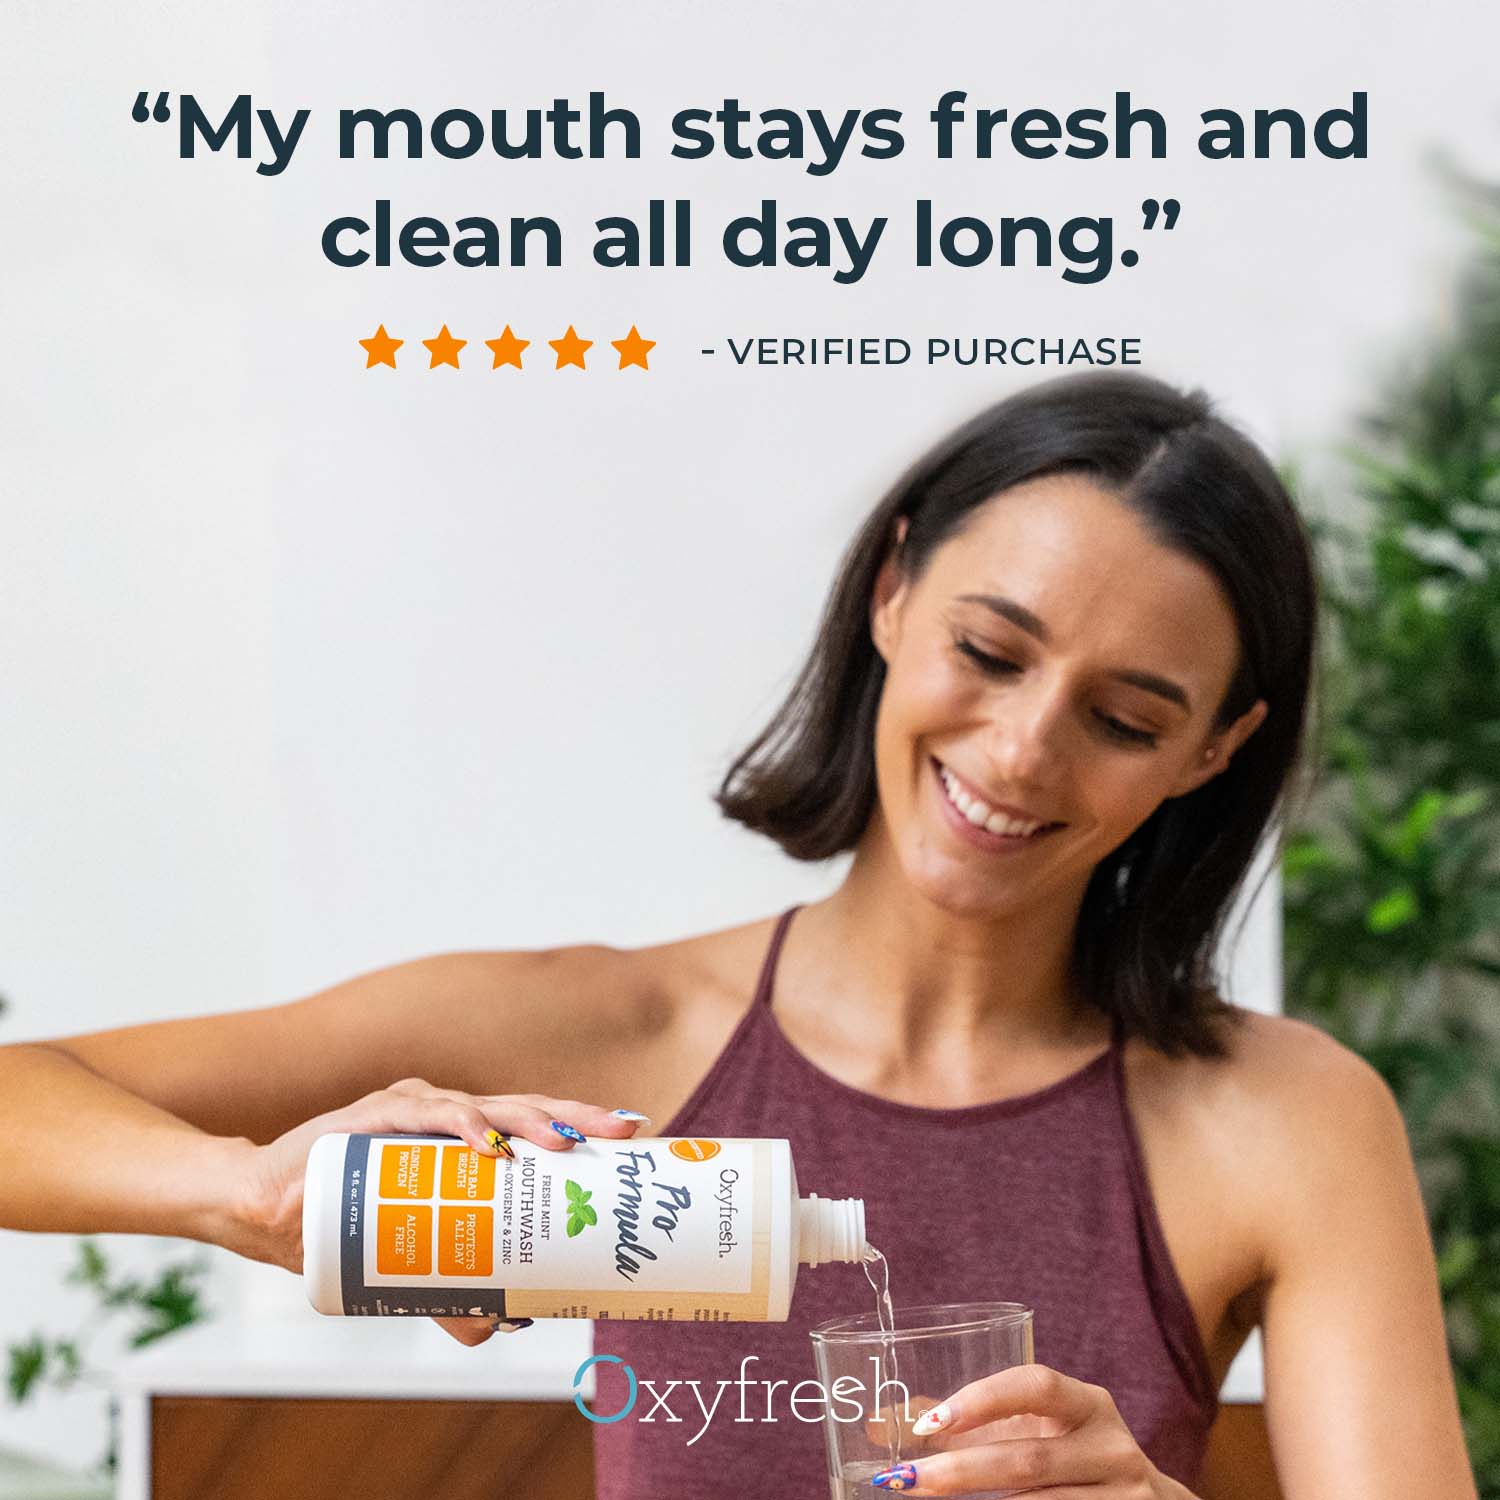 oxyfresh-pro-formula-mouthwash-review-"My-mouth-stays-fresh-and-clean-all-day-long."